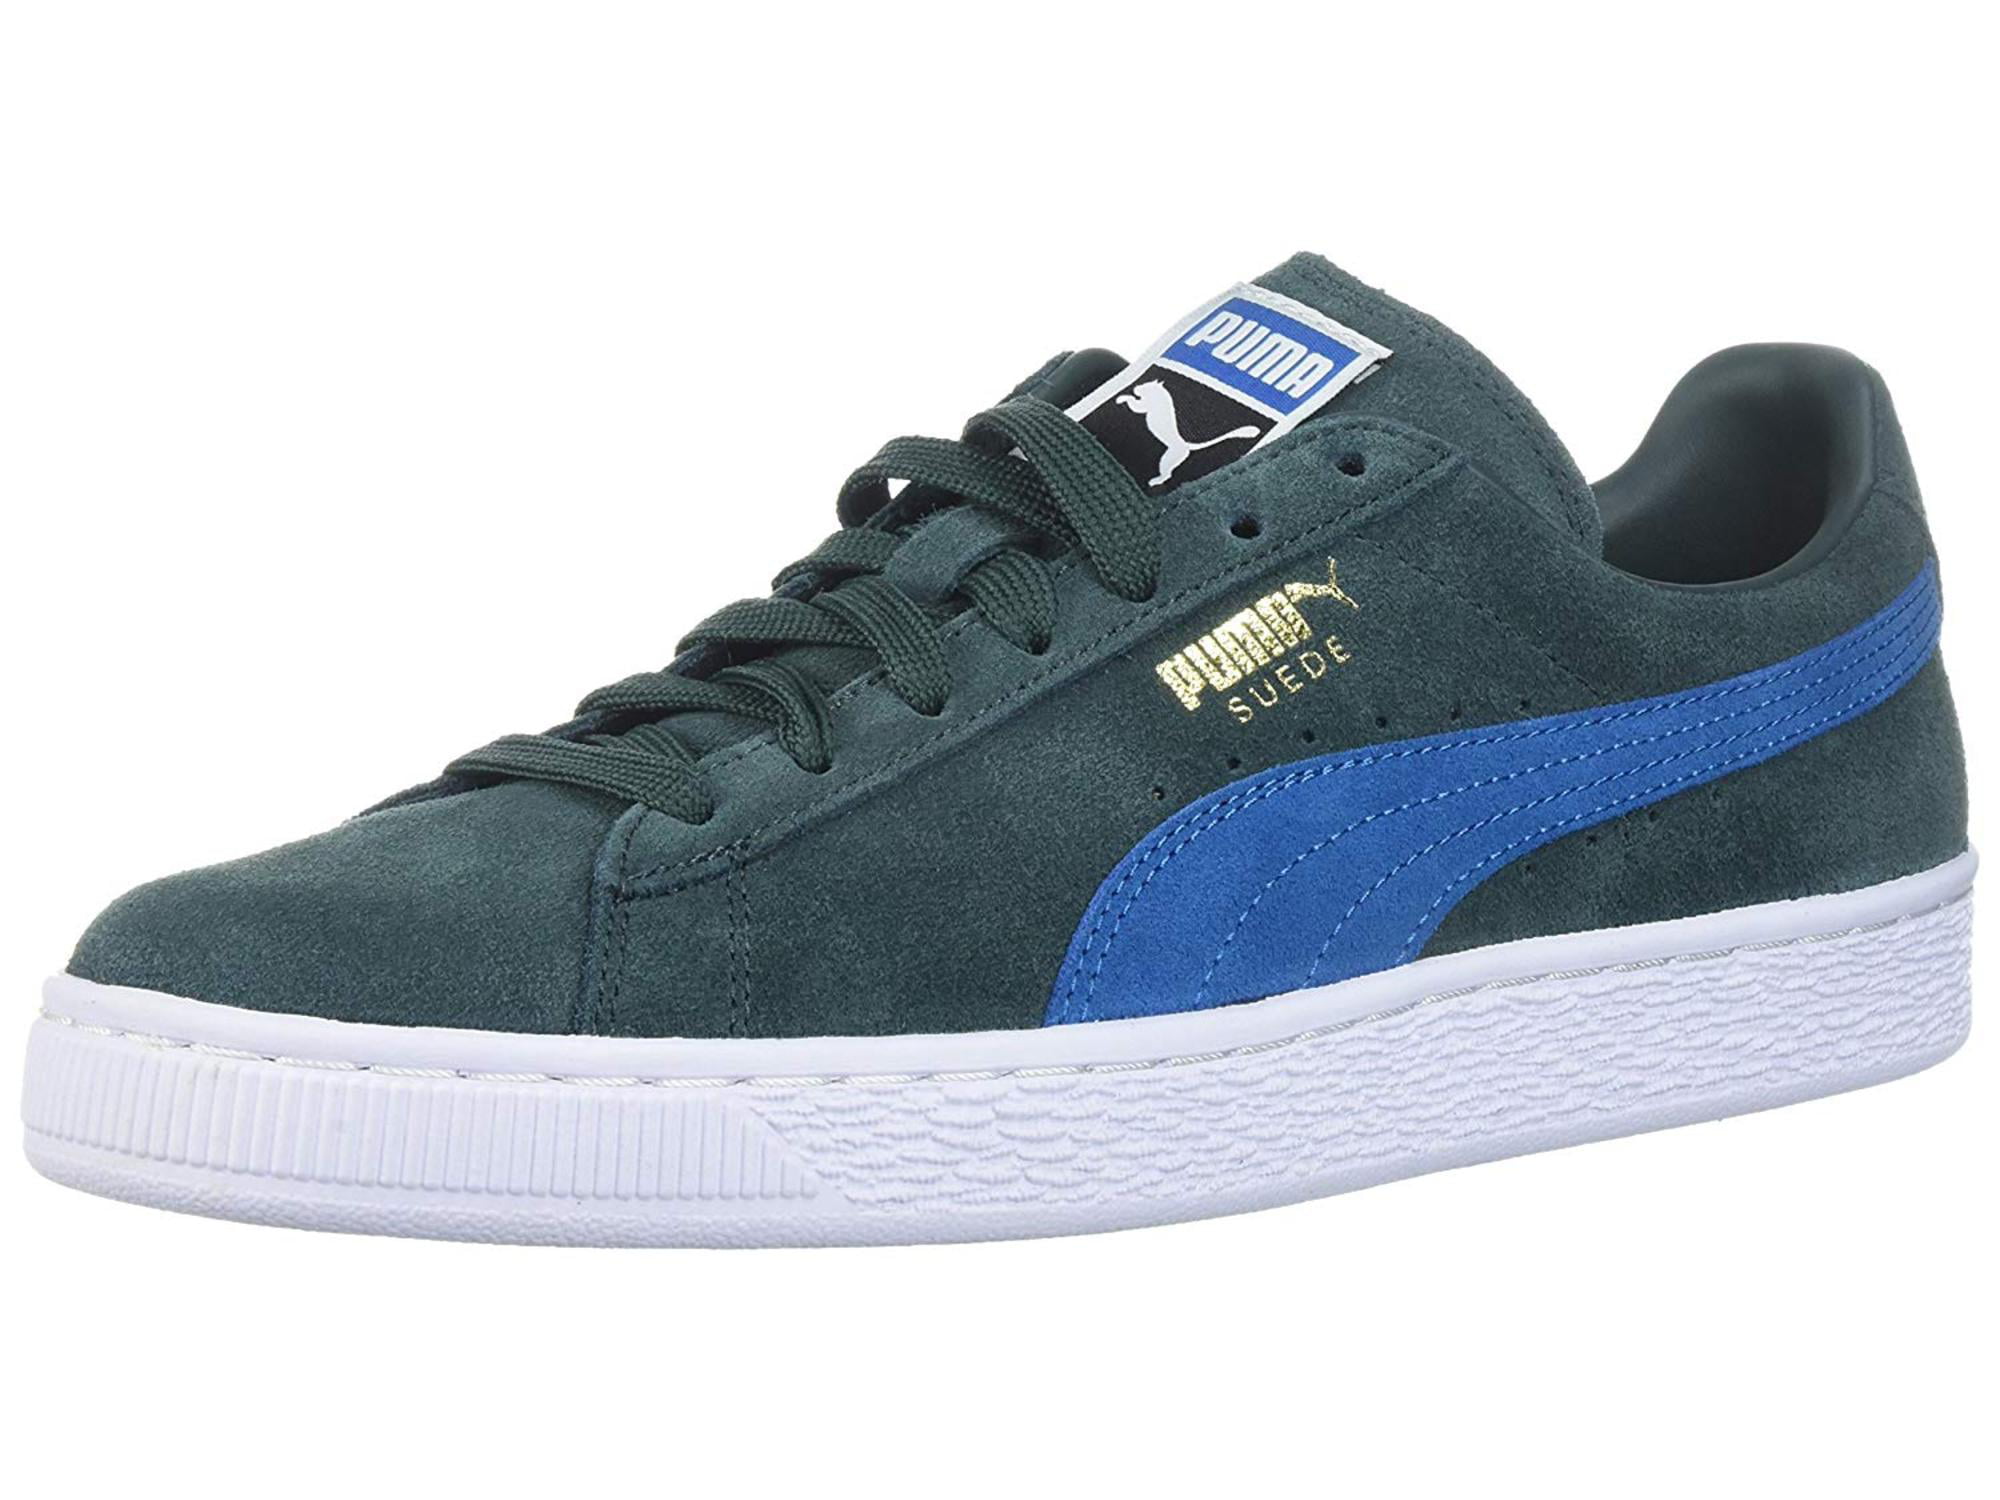 Puma Womens 35546 01 Suede Low Top Lace Up Fashion Sneakers - Walmart.com